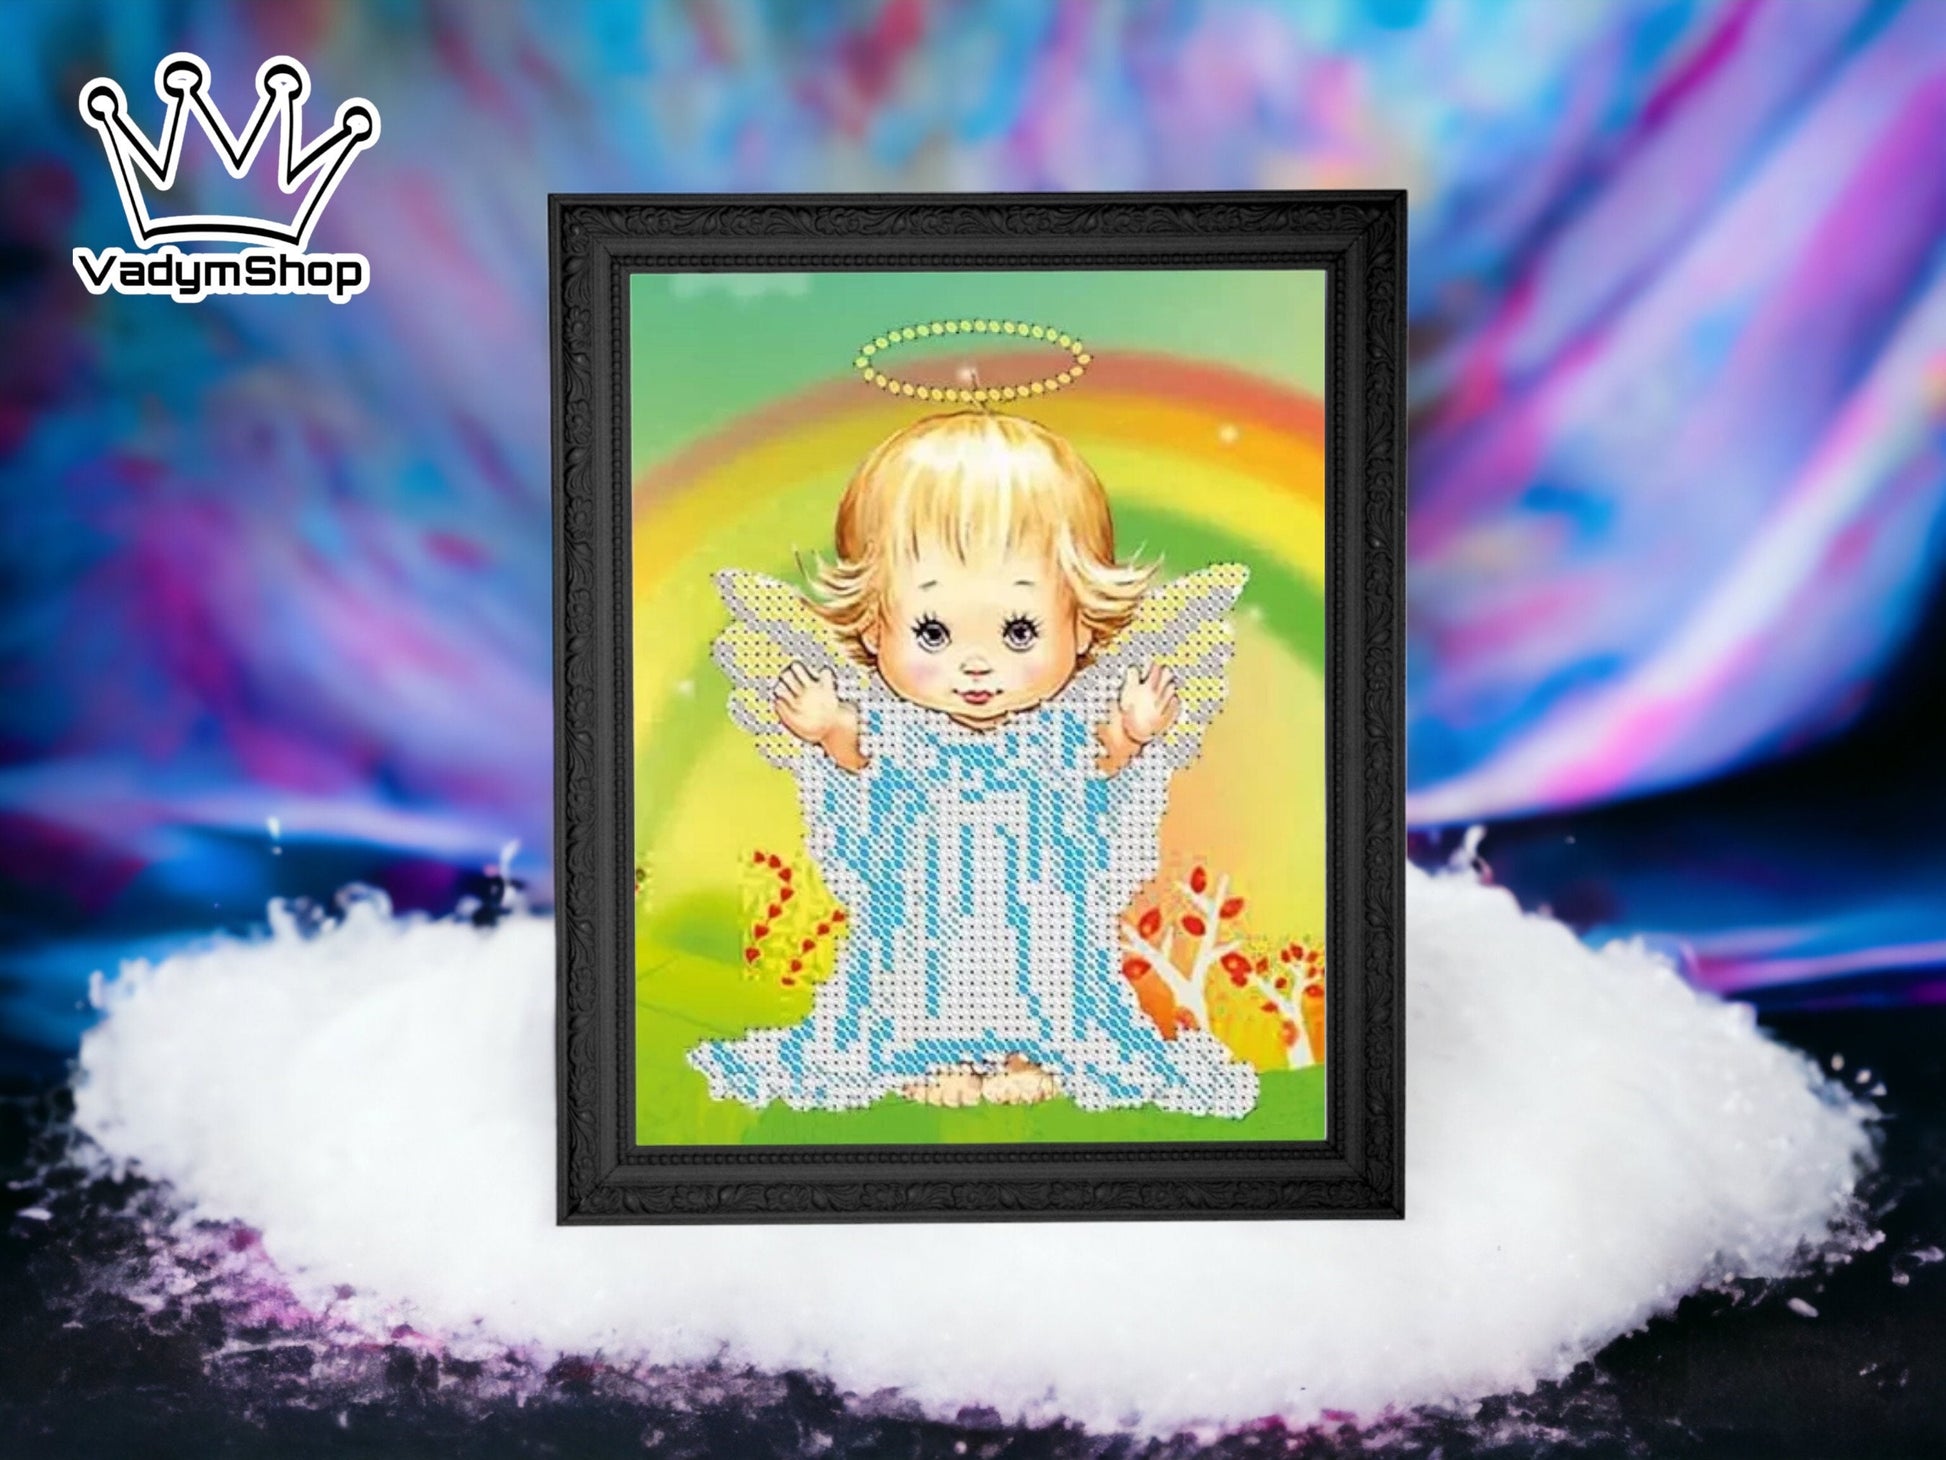 Small Bead embroidery kit "Angel and rainbow". Size: 5.5-6.7 in (14-17cm) - VadymShop